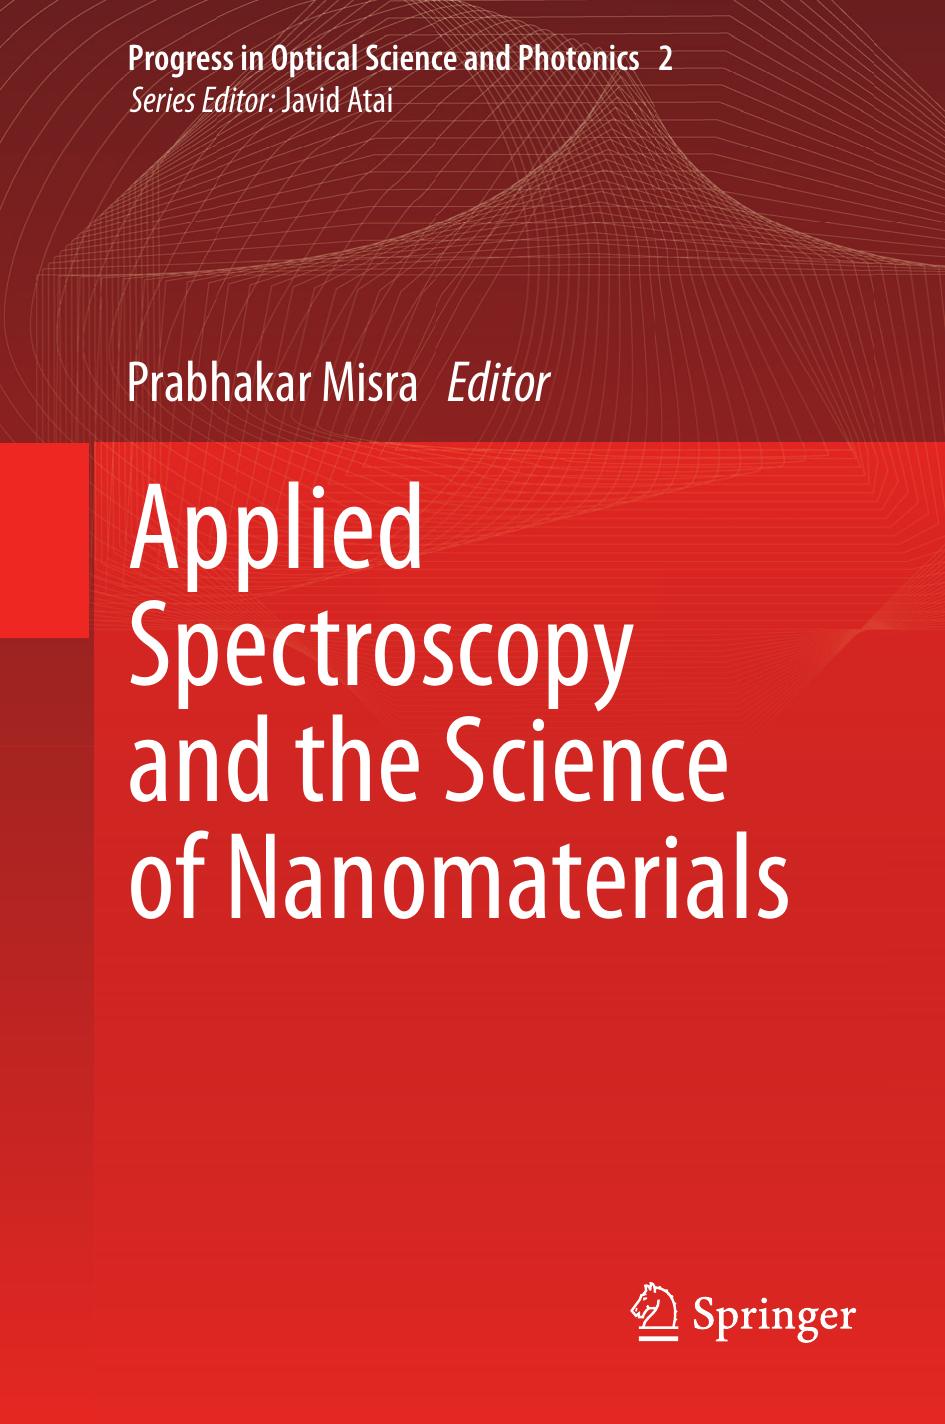 Applied Spectroscopy and the Science of Nanomaterials 2015